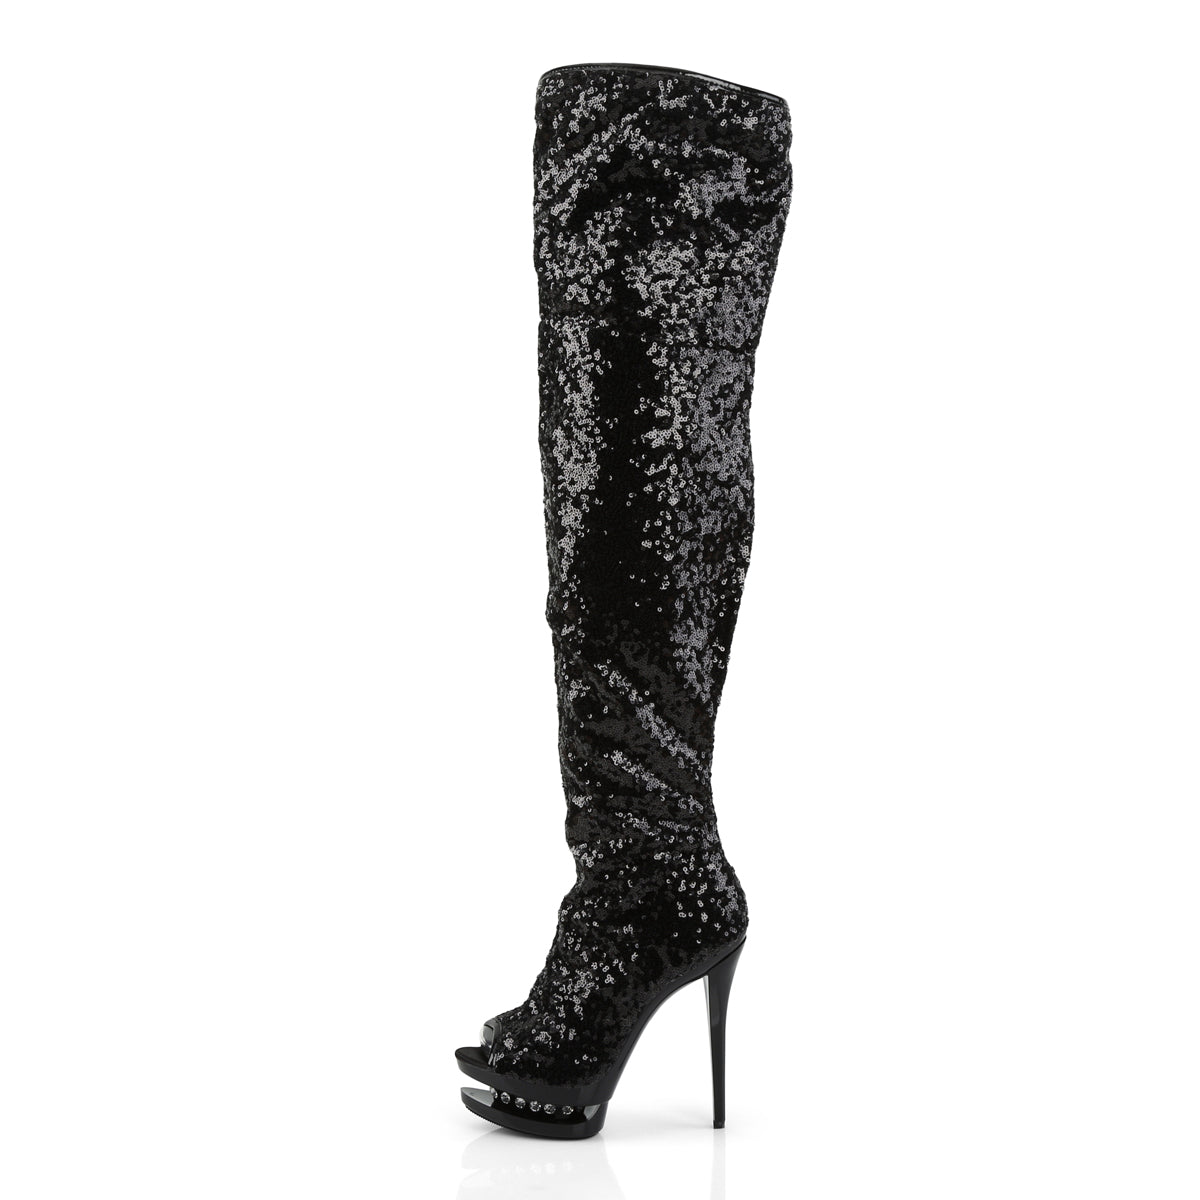 BLONDIE-R-3011 Sexy 6 Inch Black Sequins Pole Dancing Shoes-Pleaser- Sexy Shoes Pole Dance Heels